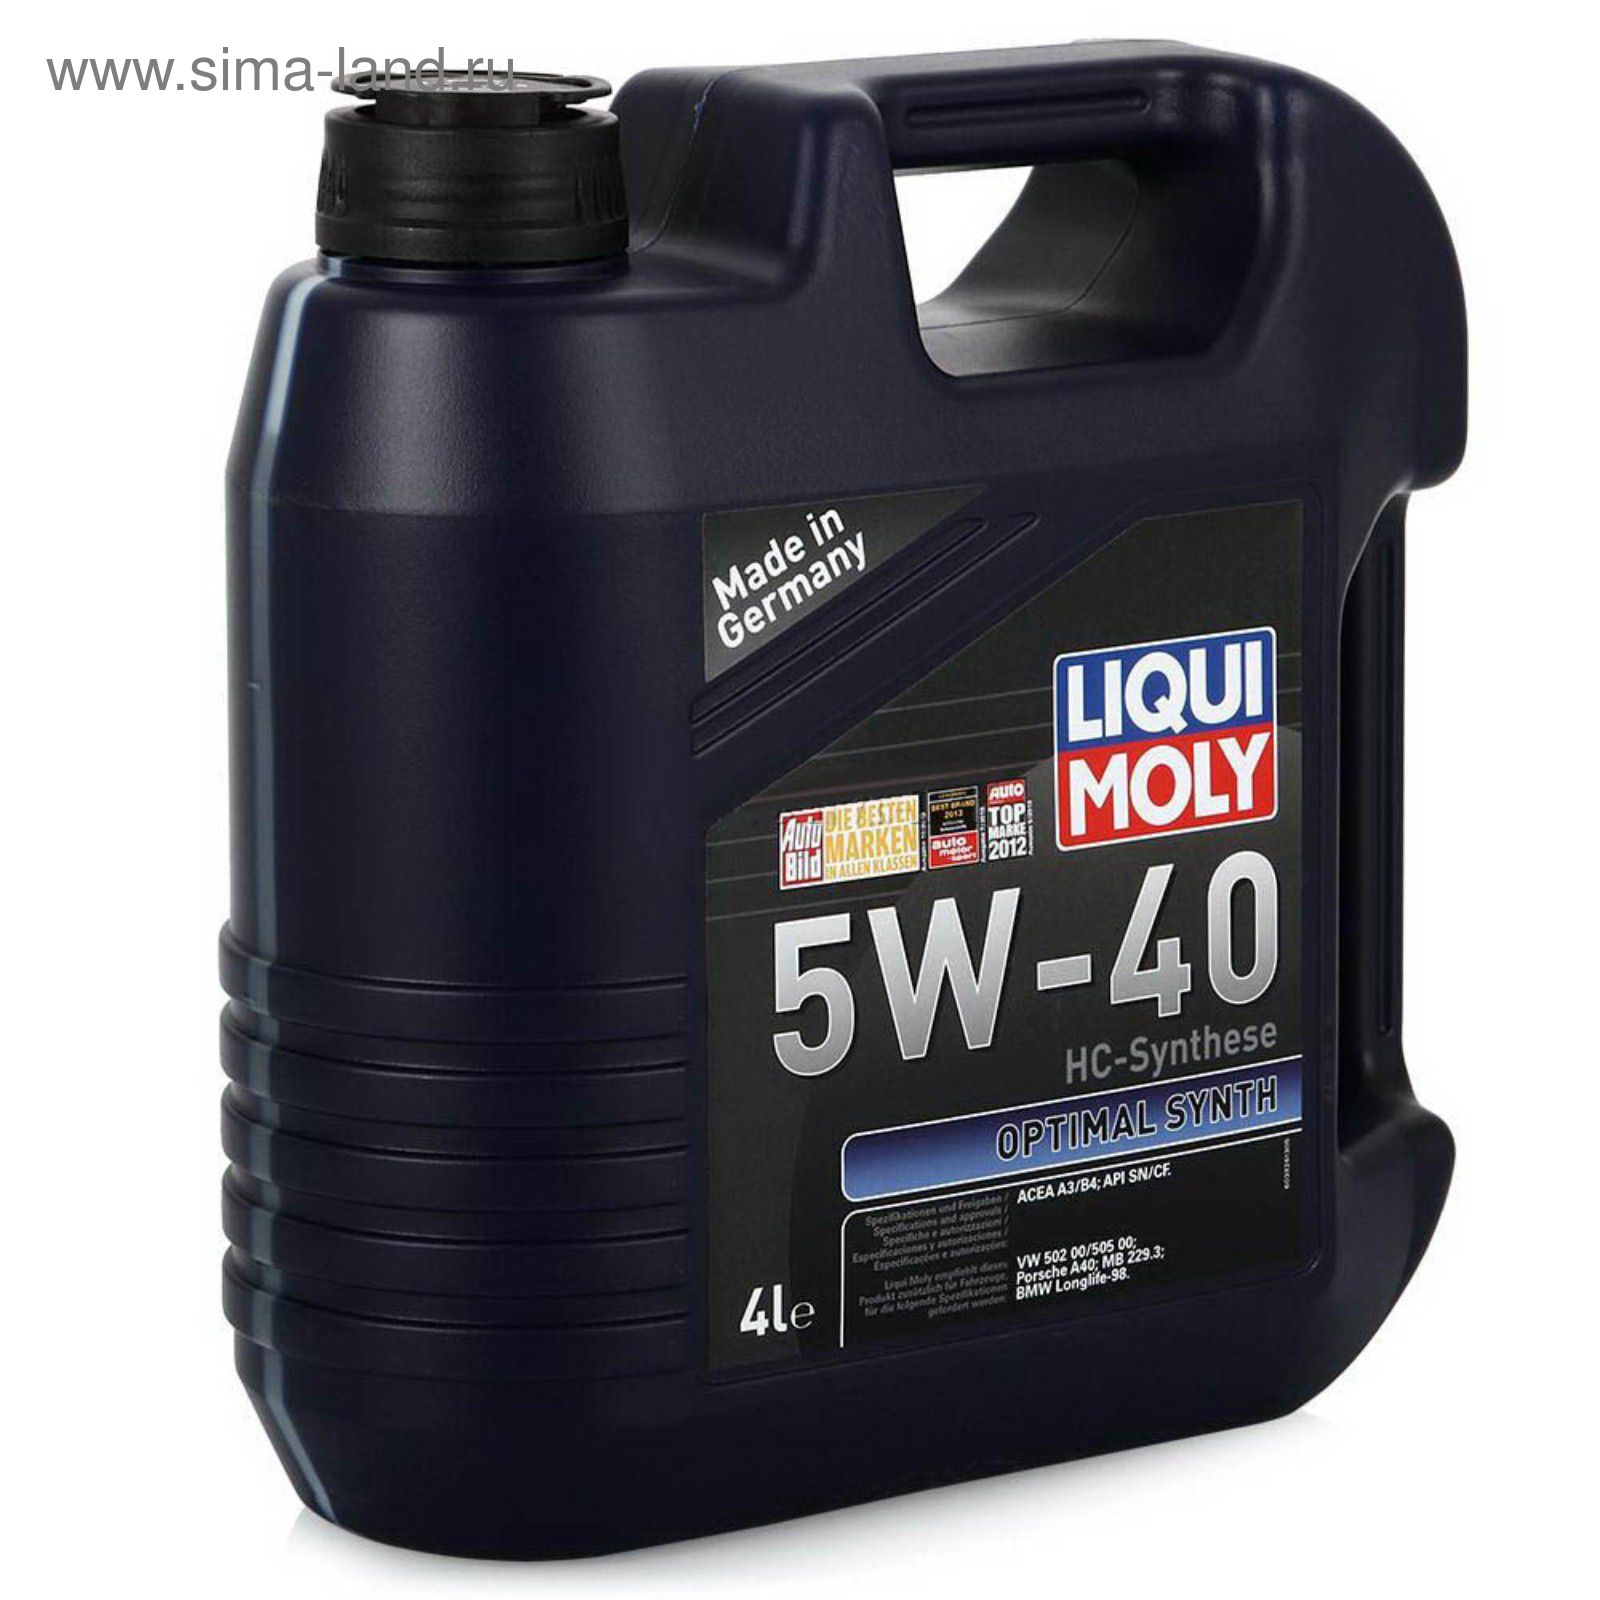 Масло 5w40 synth. Liqui Moly 5w40 OPTIMAL Synth. Liqui Moly 5w40 OPTIMAL Synth 5л. Liqui Moly 3926 OPTIMAL Synth 5w-40 4. 3926 Liqui Moly OPTIMAL Synth 5w-40.